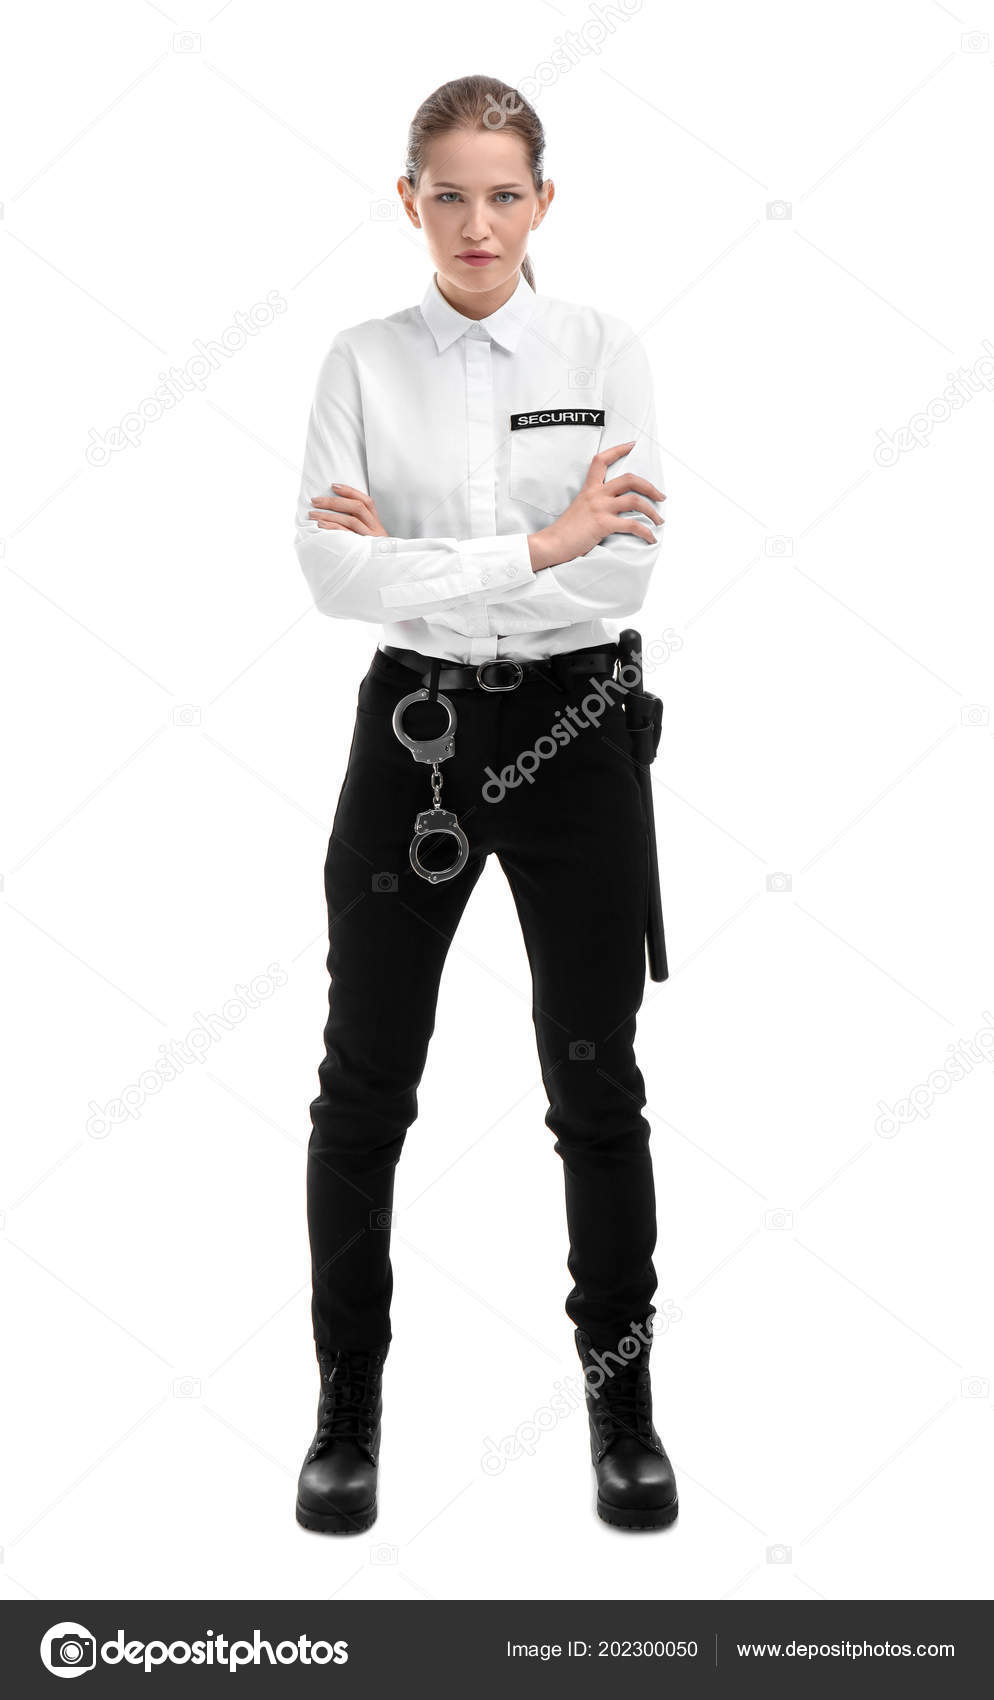 Female Security Guard Uniform White Background Stock Photo By